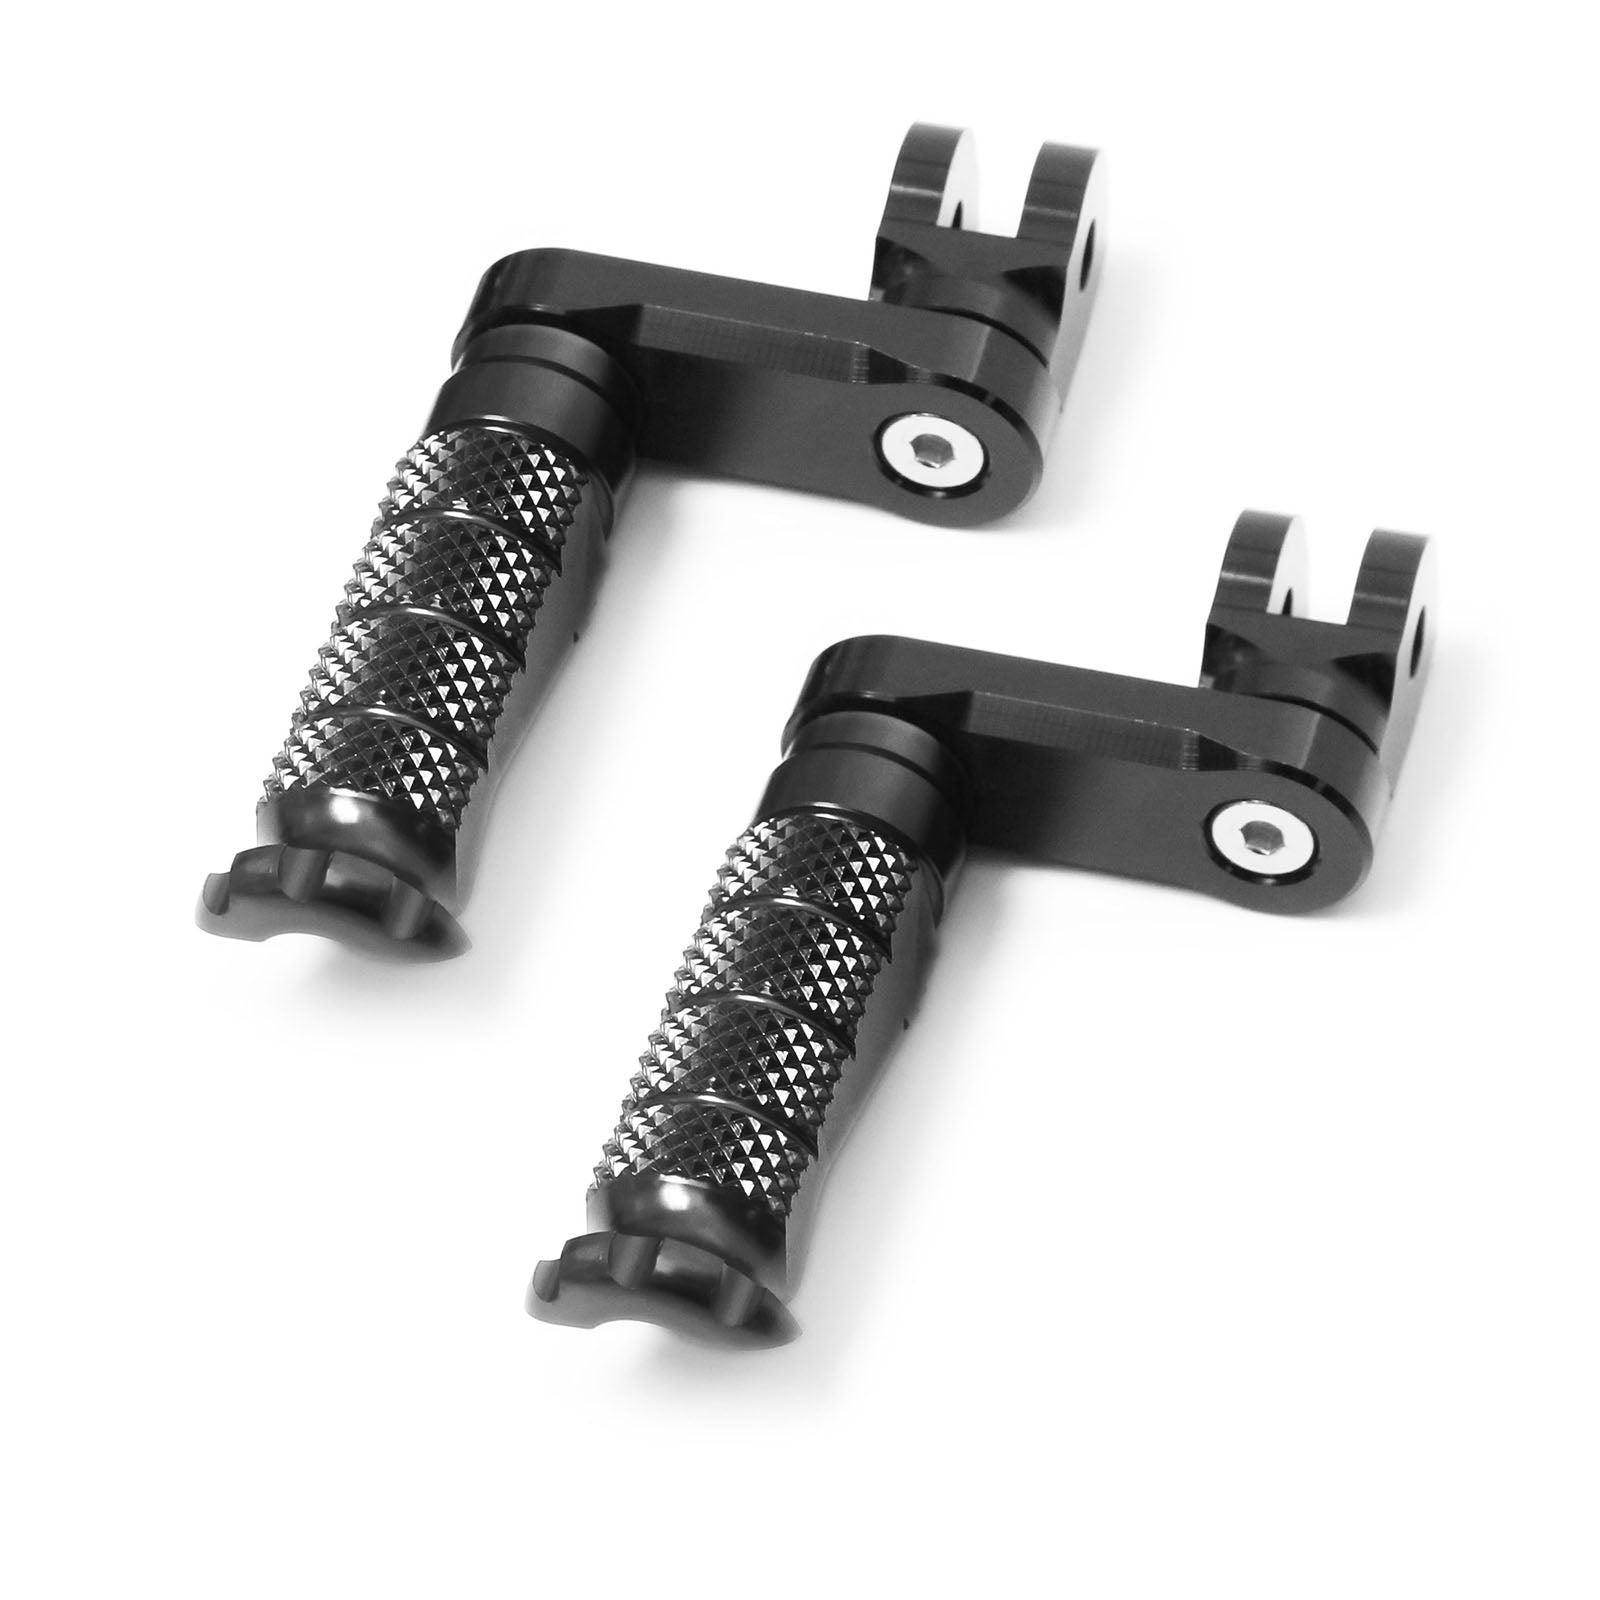 Fit Razor MX350 MX400 MX500 MX650 R-FIGHT 40mm 1.5 inch Adjustable Extended Extension Lowering Lower Front Foot Pegs Footpegs Electric Dirt Bike MC Motoparts